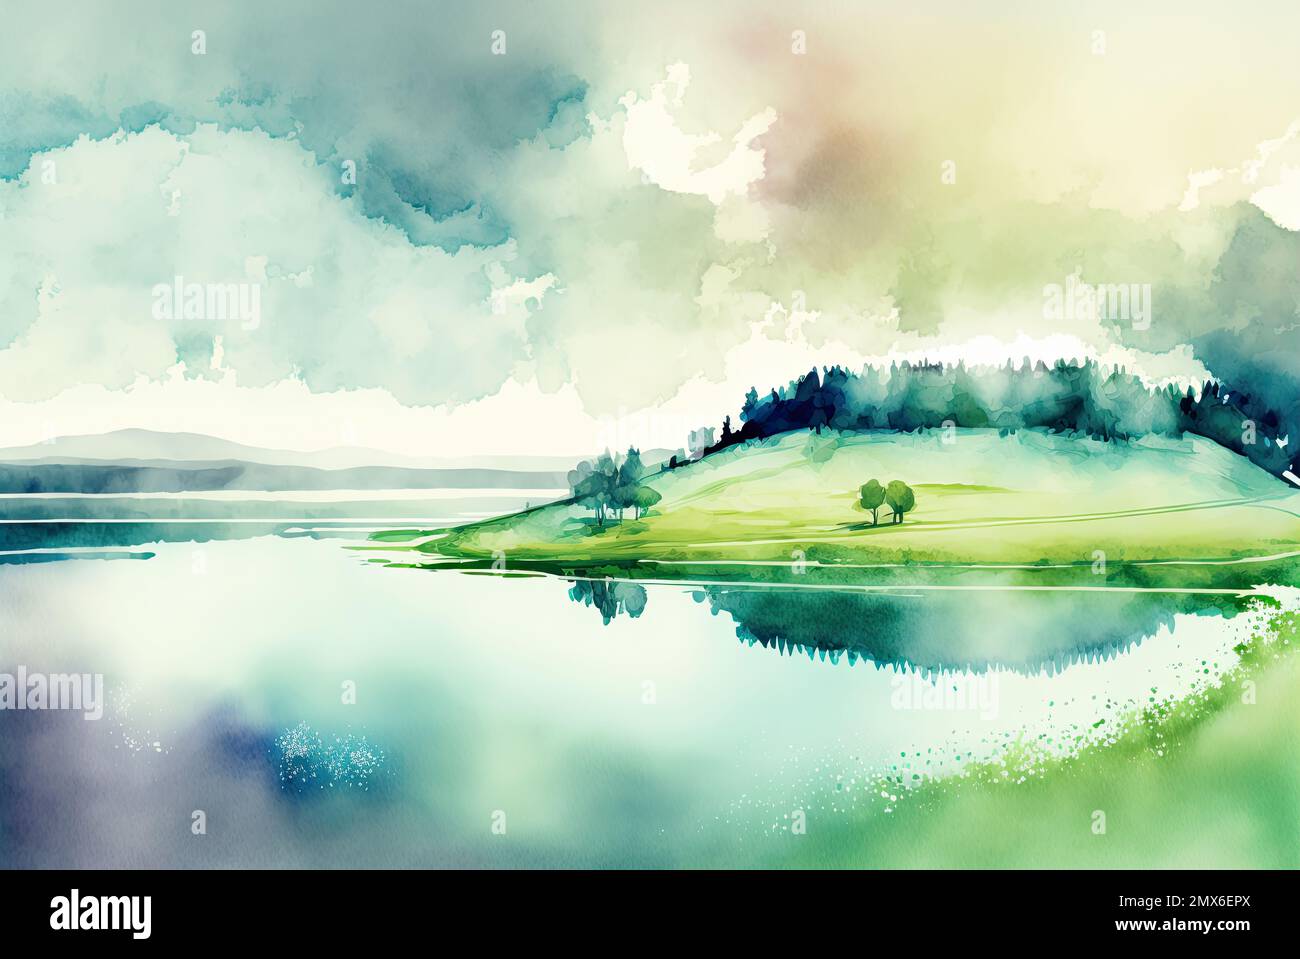 Landscape, Abstract Watercolor Background, Rolling Hills, Calm Lake, Lush  Green Trees, Tranquil, Peaceful, Nature, Scenery, Wallpaper Stock Photo -  Alamy